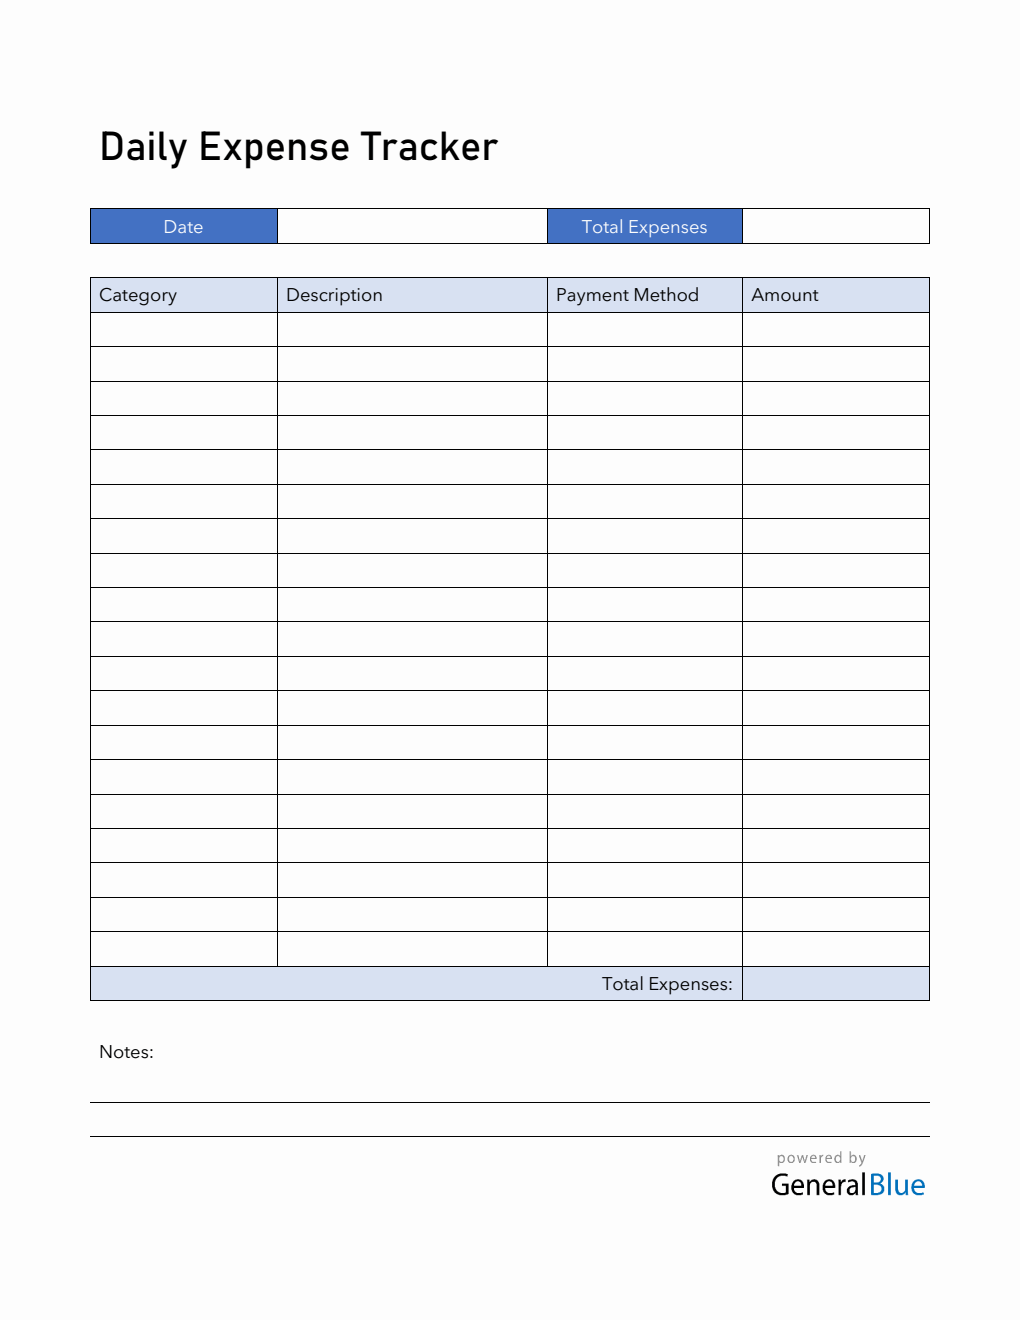 Daily Expense Tracker in PDF (Blue)